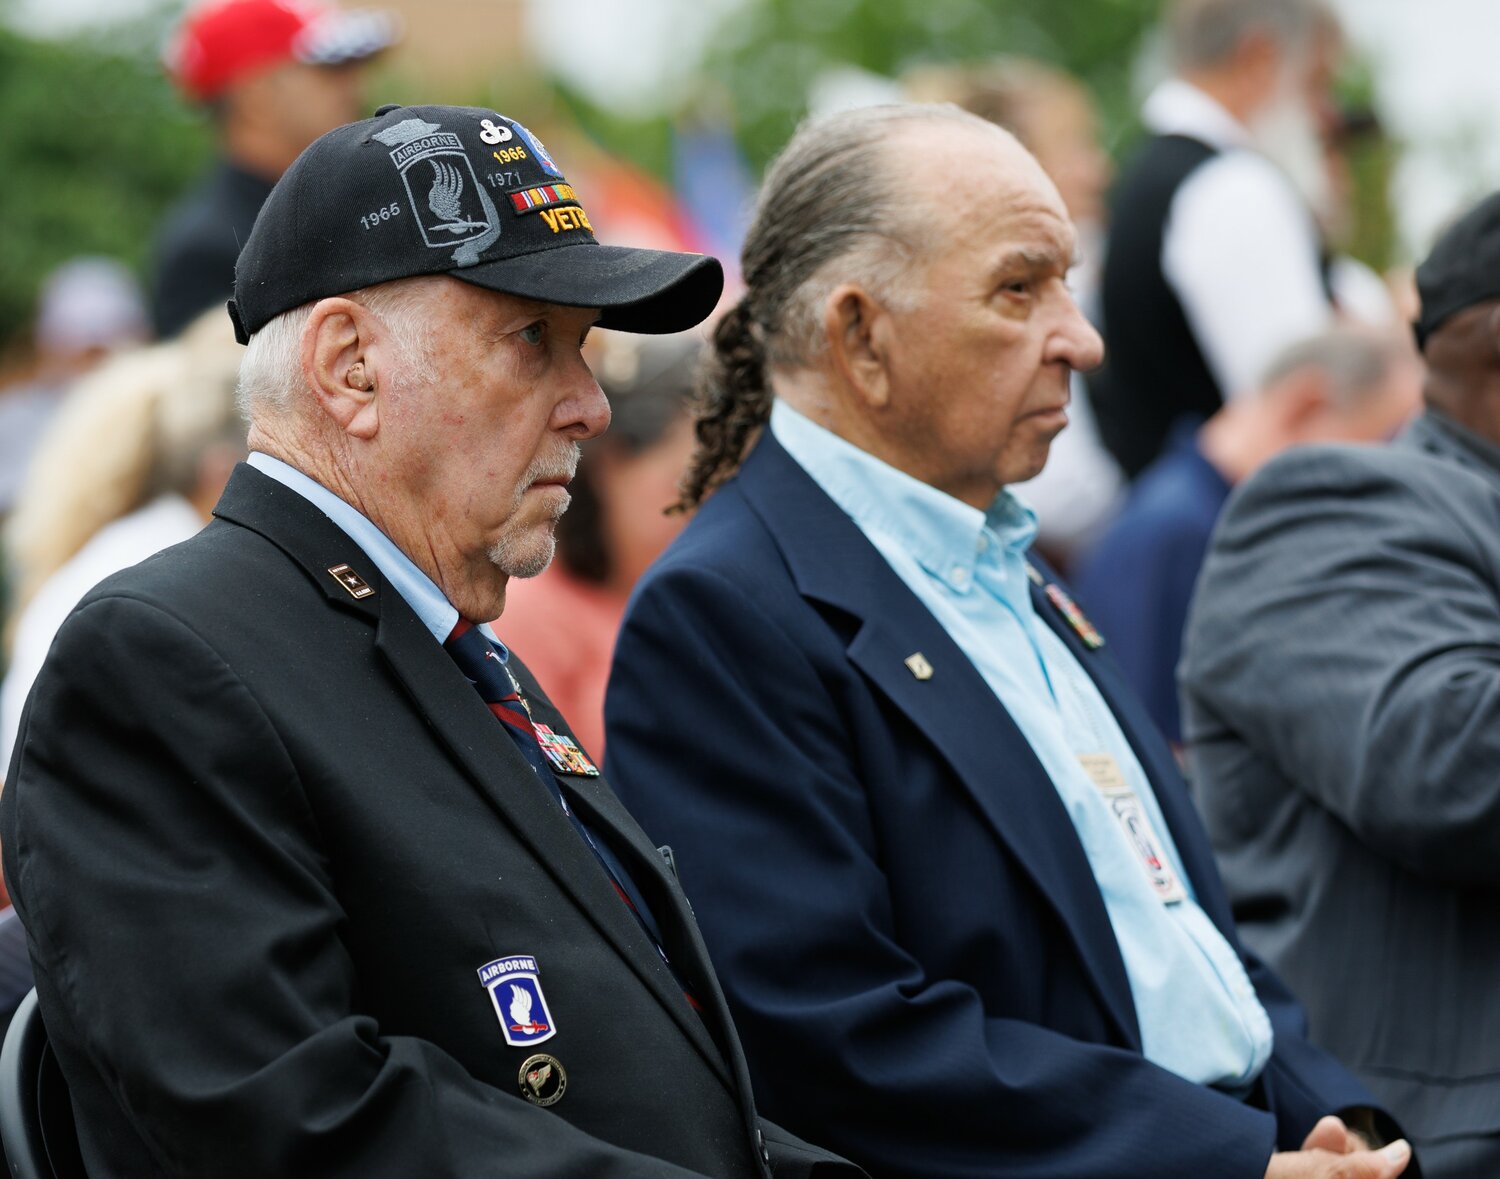 Members of the audience watch the Memorial Day ceremony at Freedom Memorial Park on Monday.